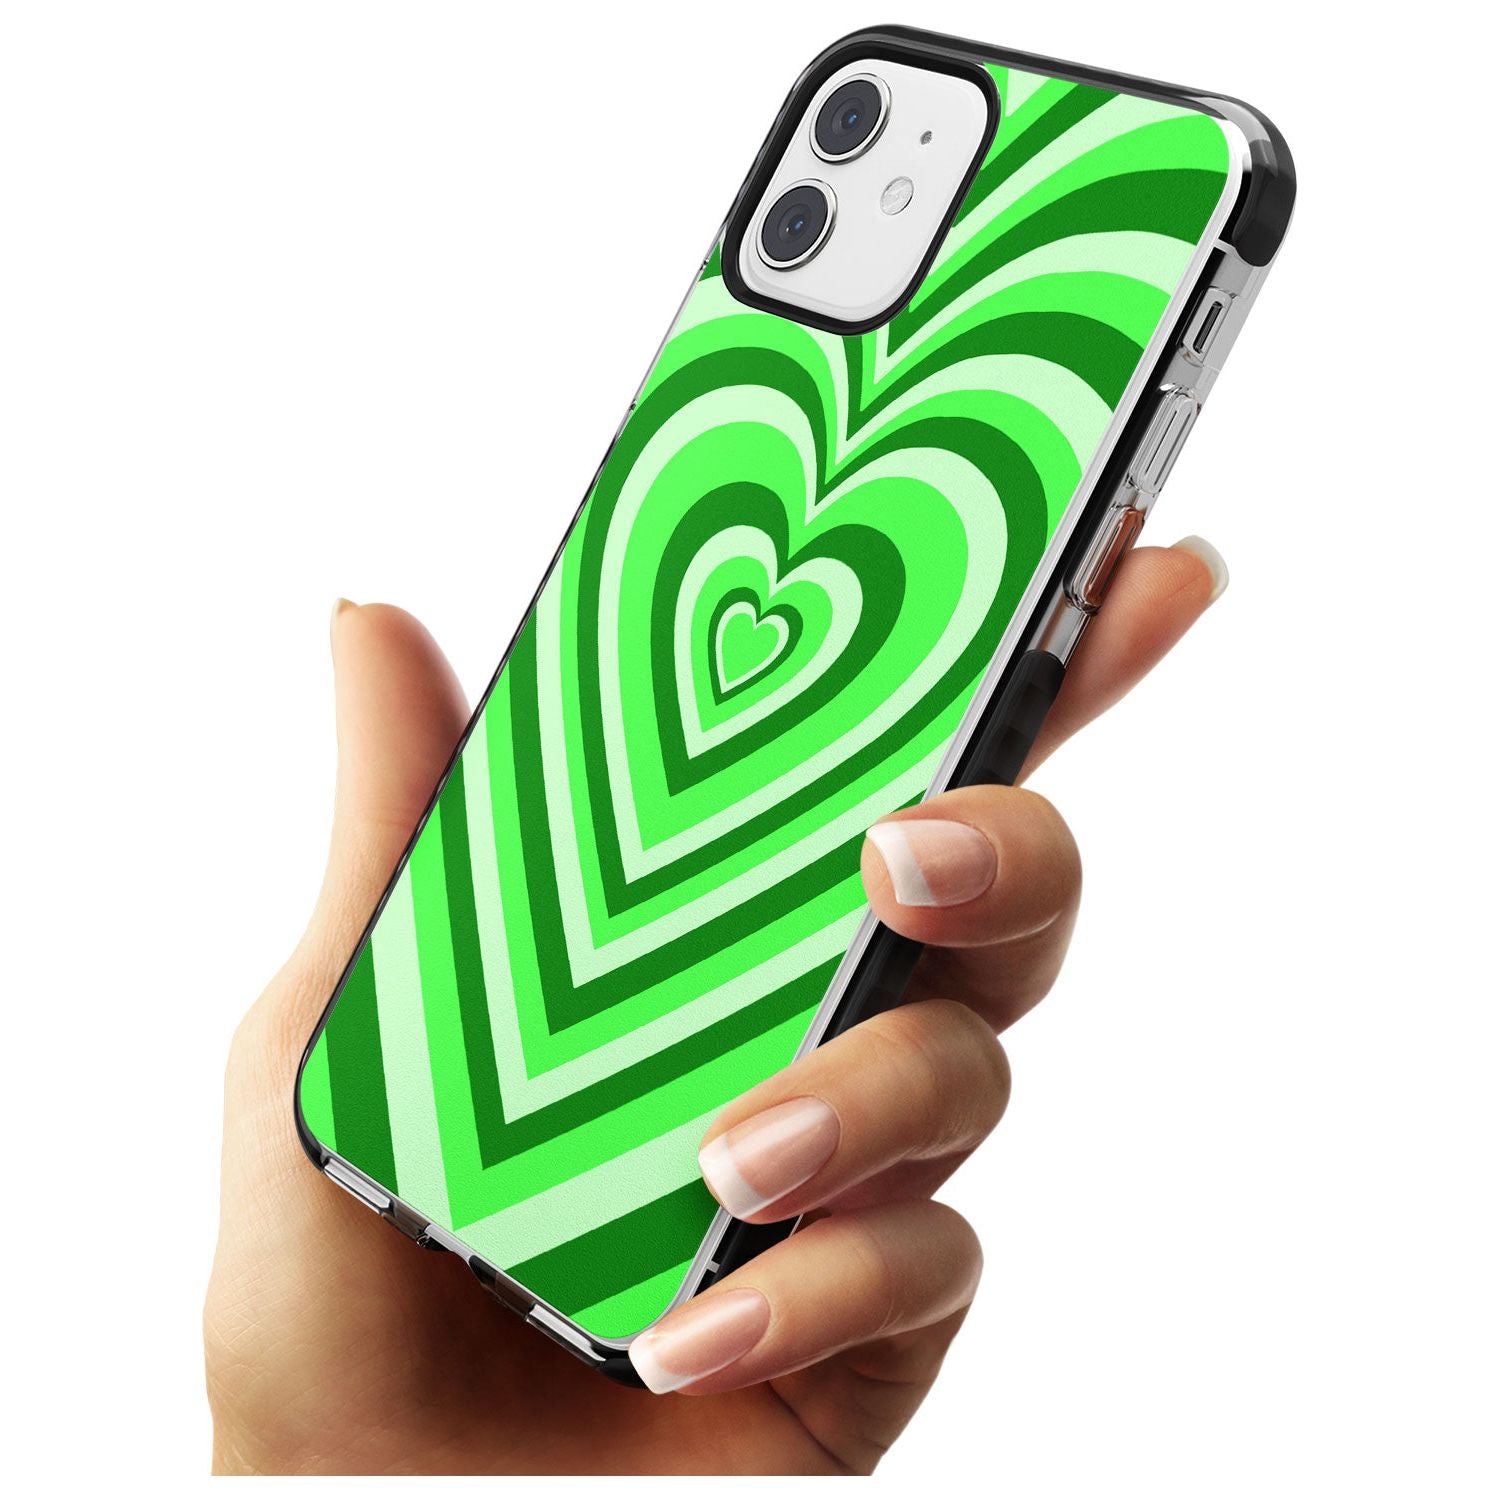 Green Heart Illusion Black Impact Phone Case for iPhone 11 Pro Max